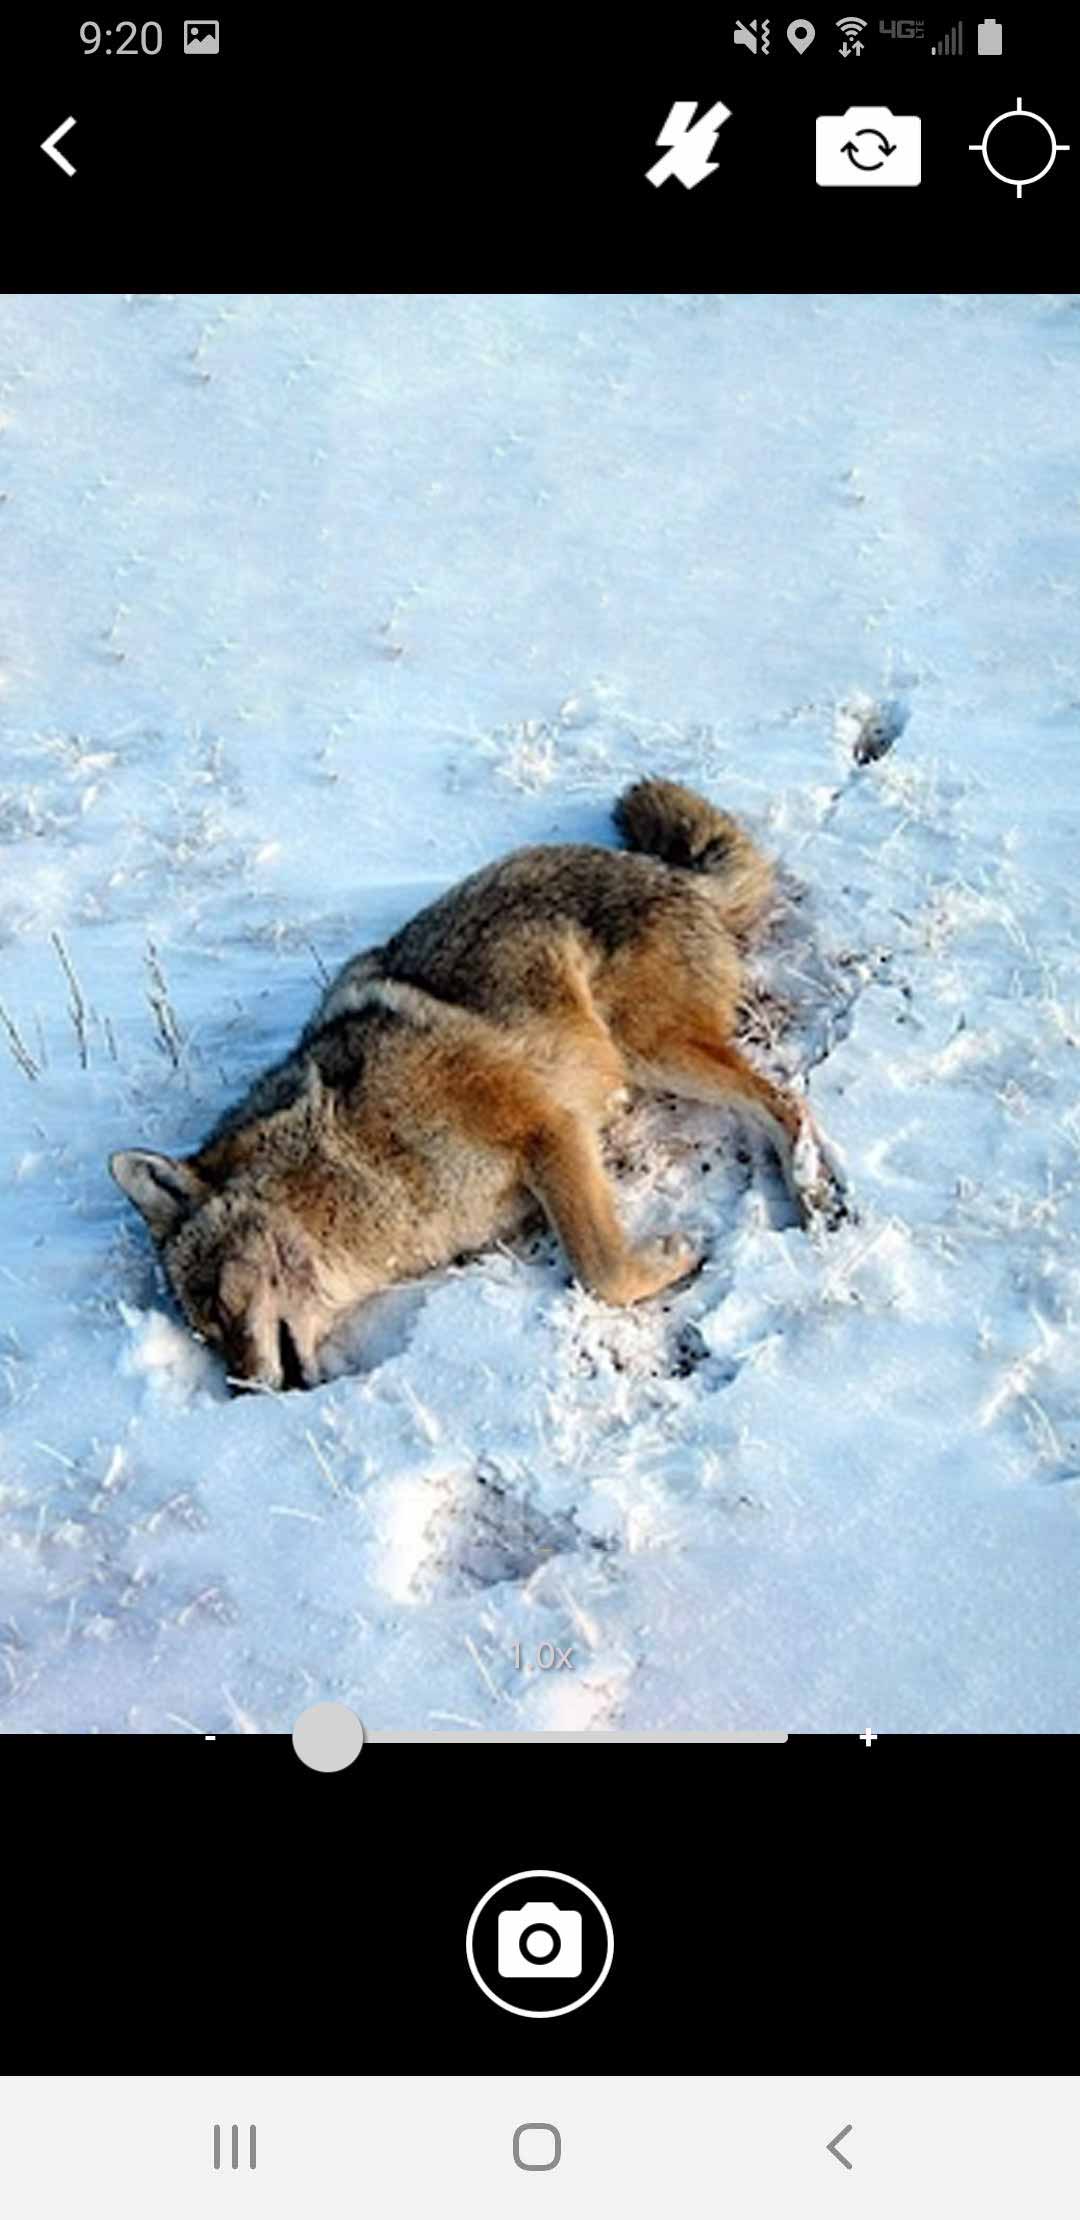 A dead coyote lying in snow.